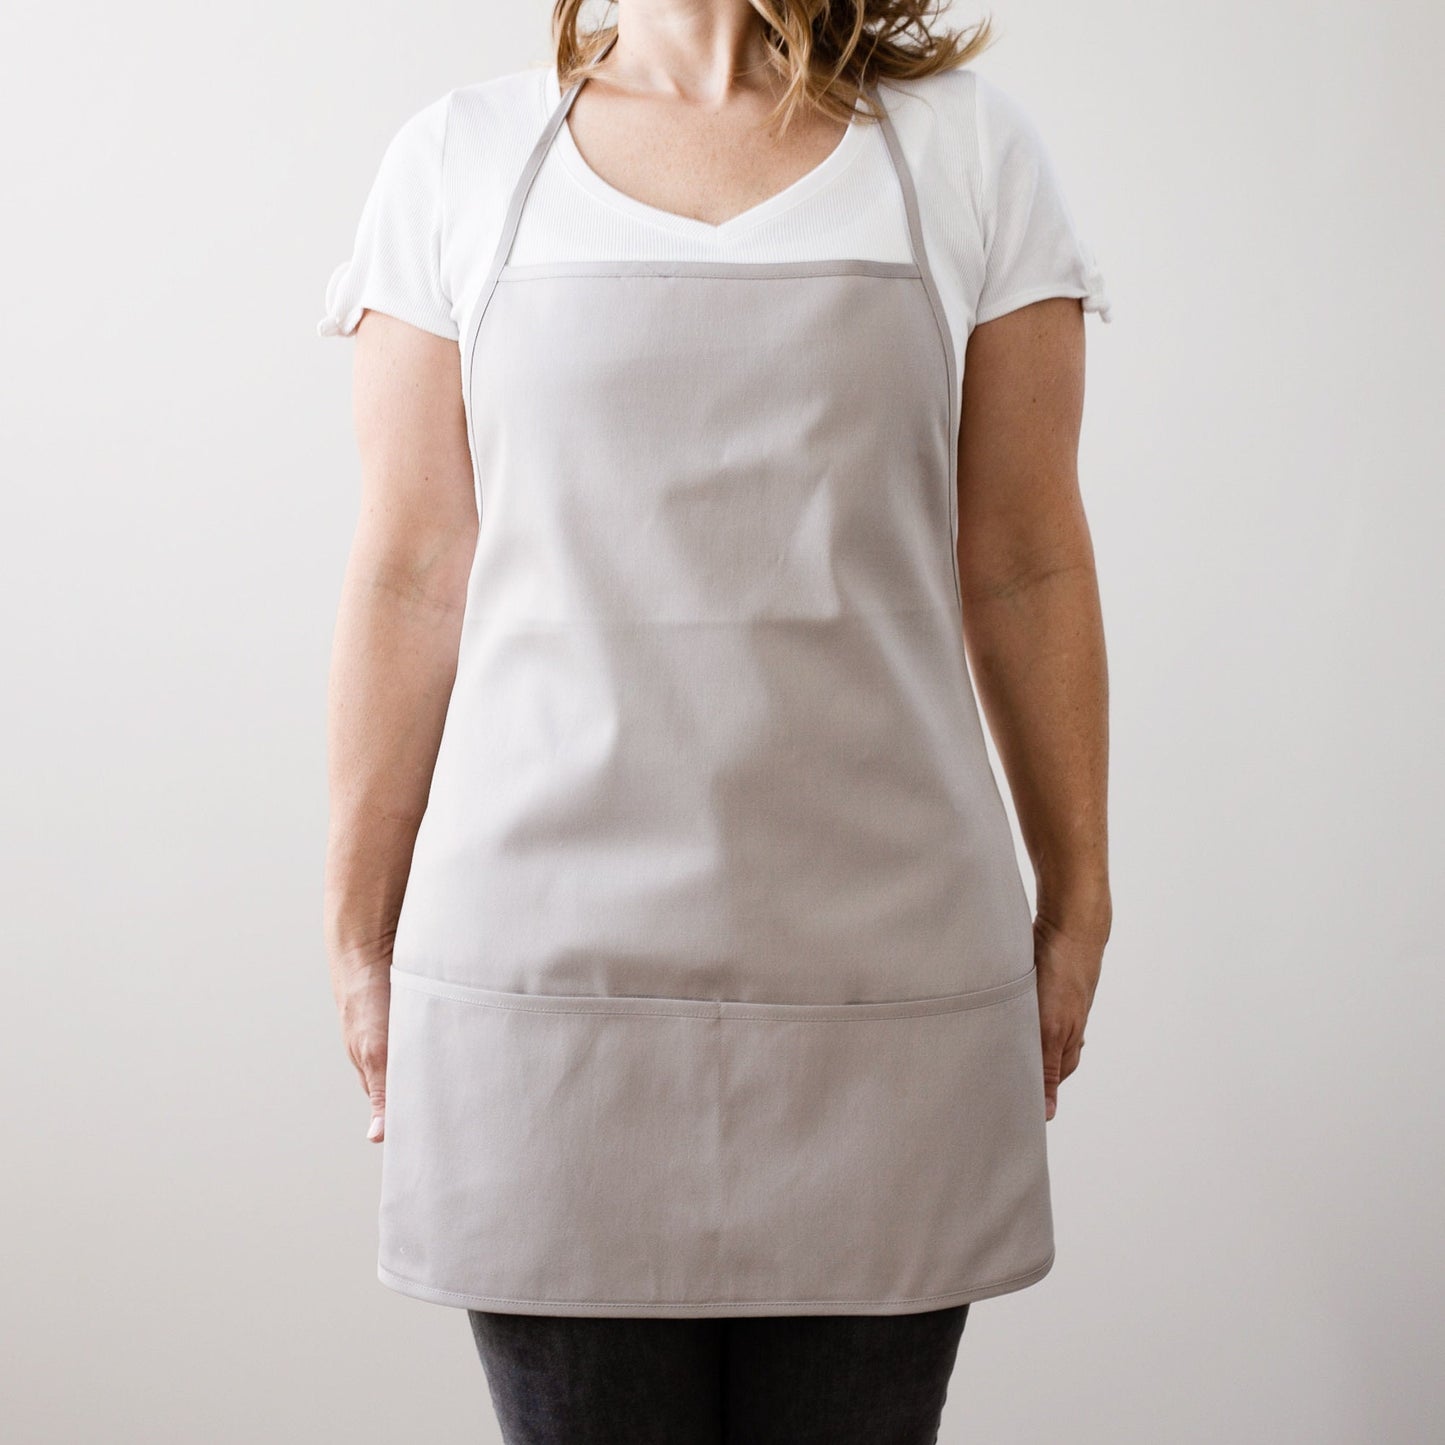 Load image into Gallery viewer, White Apron With Pocket | Full Kitchen Apron | Kitchen Wear | Cotton Apron | Vintage Apron | Cotton Canvas Full Apron | White Apron
